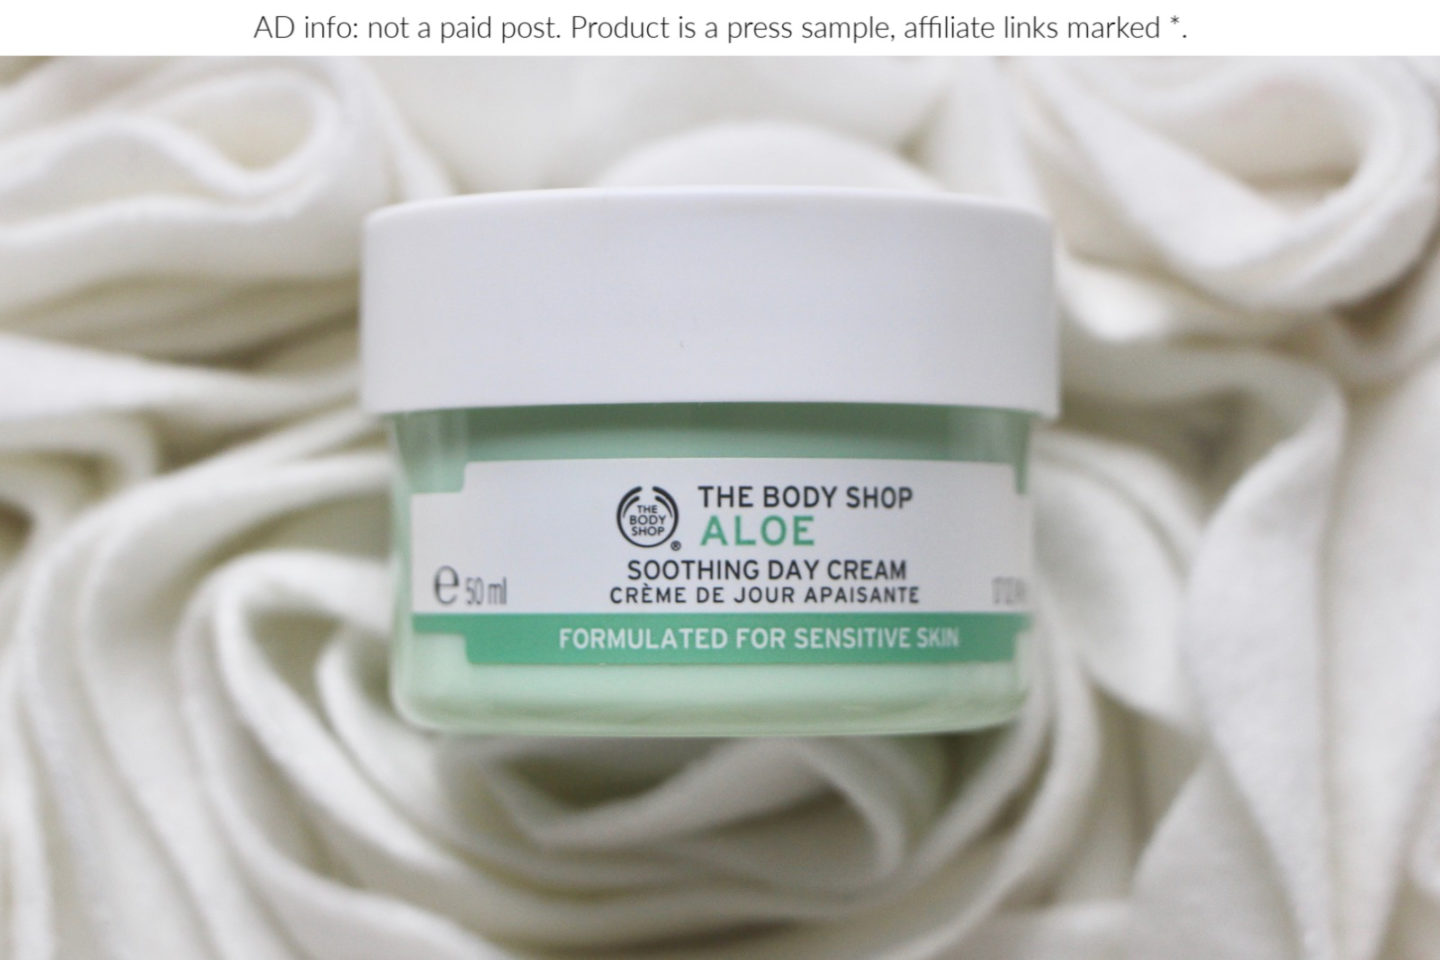 The Body Shop Aloe Soothing Day Cream for Sensitive Skin Review